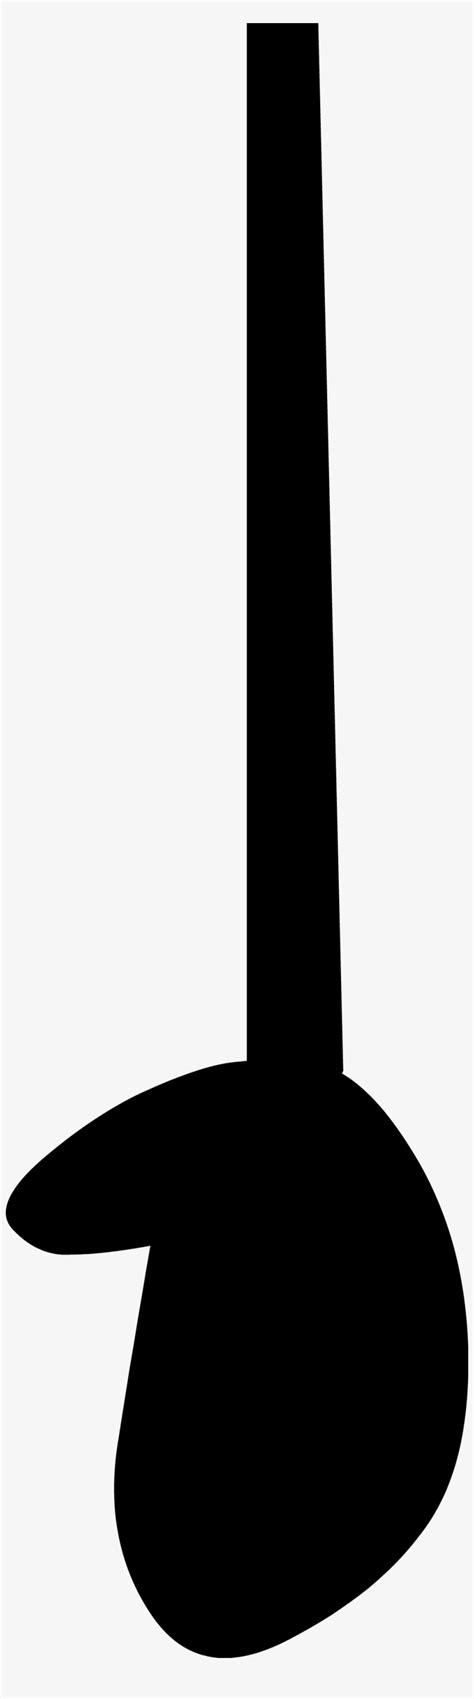 Another Ii Arm Bfdi Arms Ii Free Transparent Png Download Pngkey